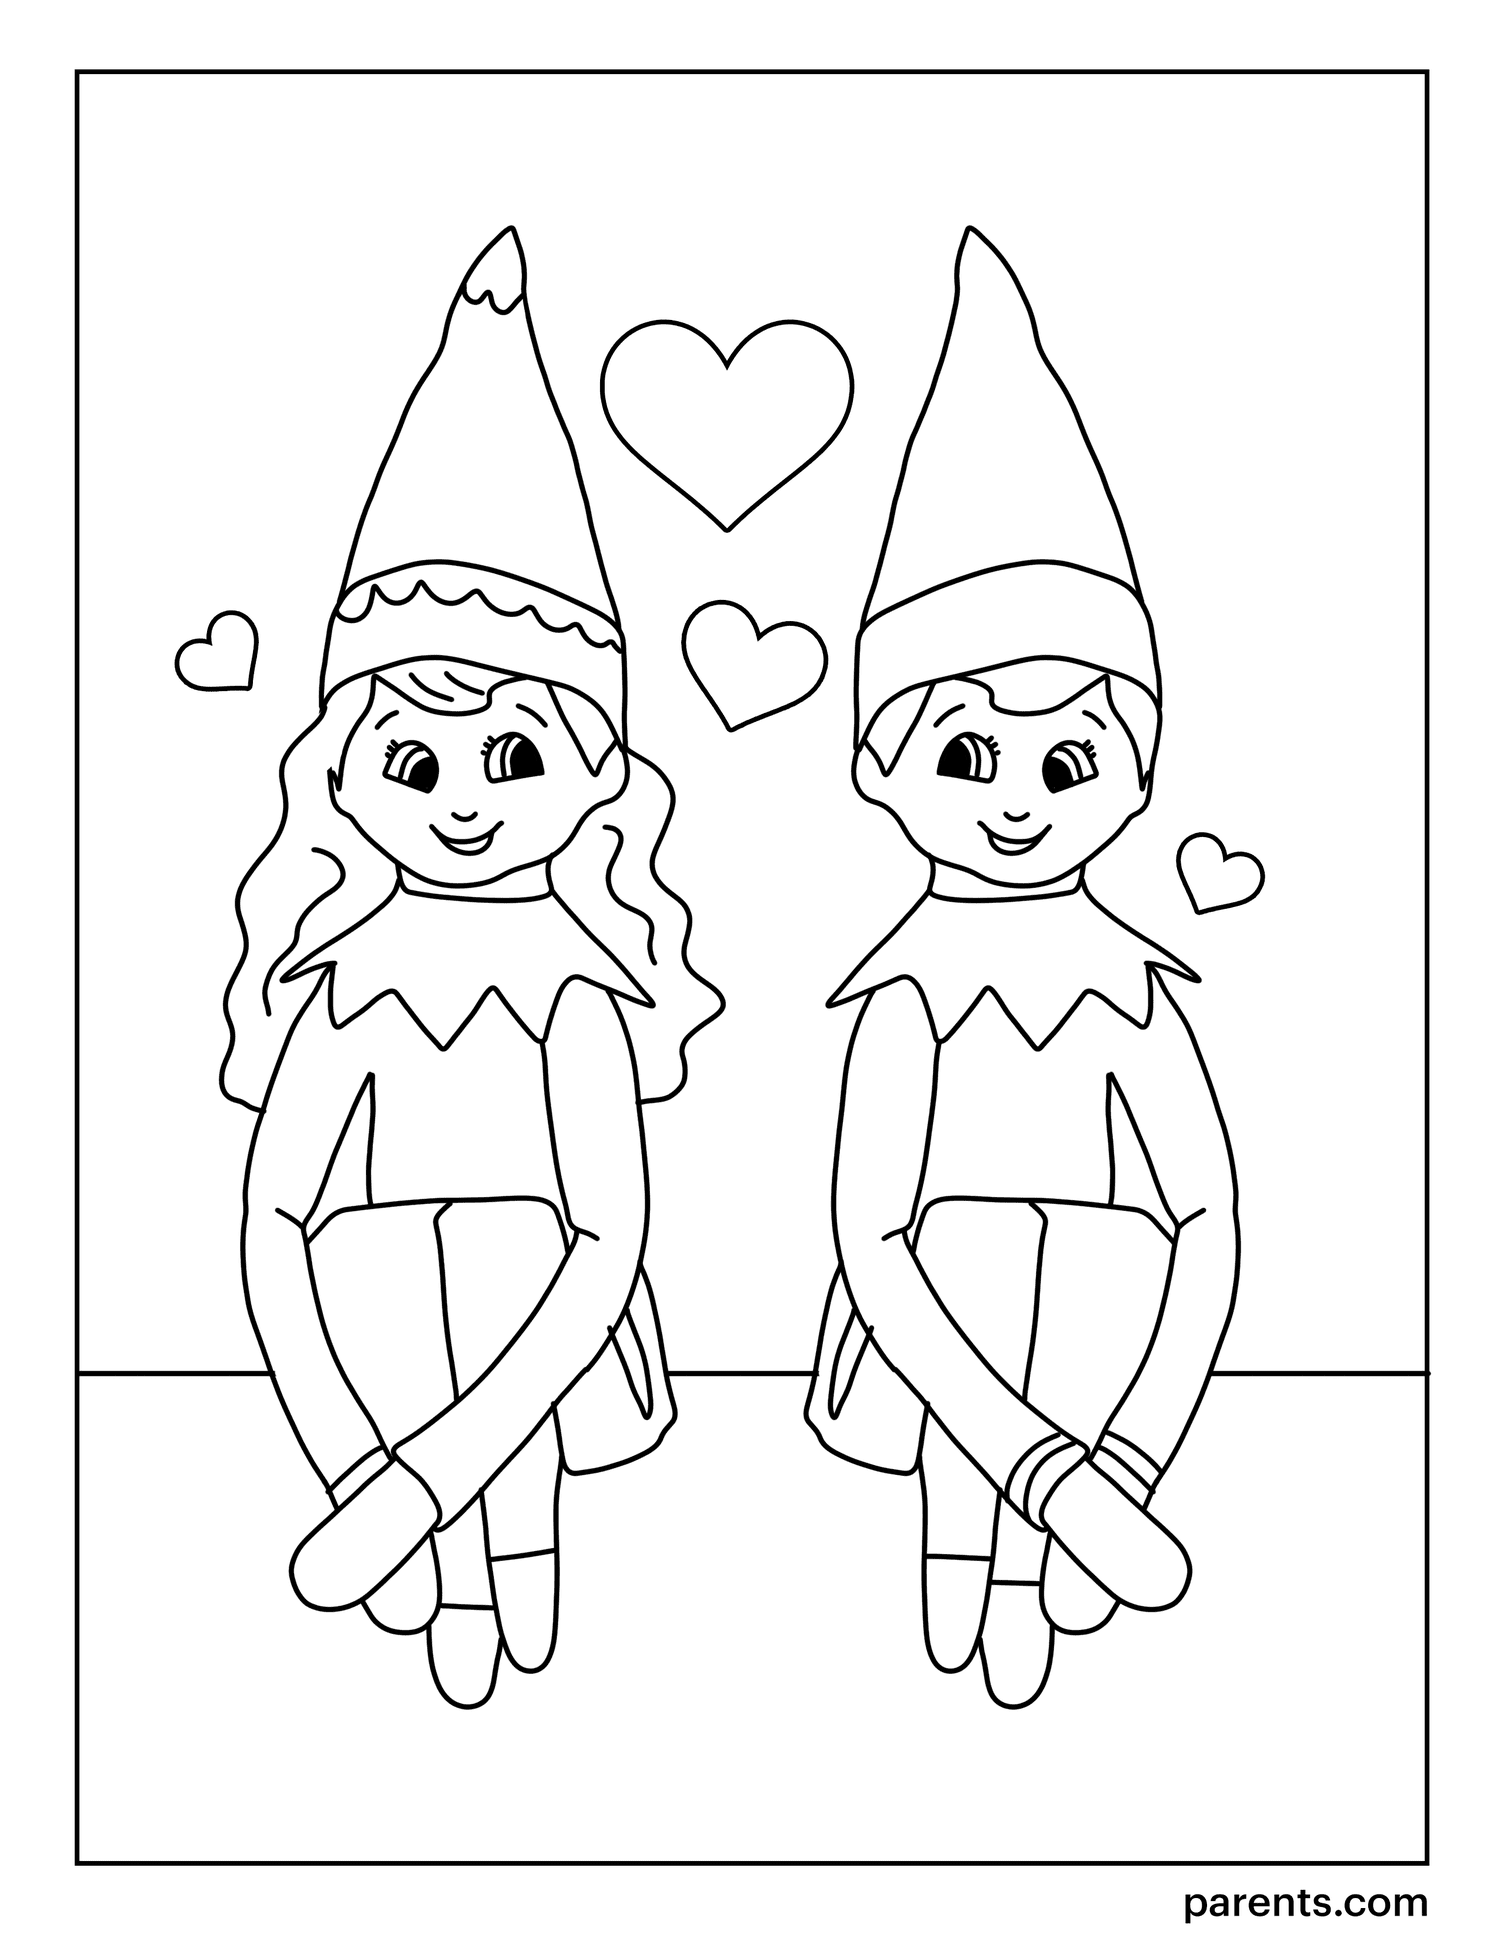 7 Elf on the Shelf Inspired Coloring Pages to Get Kids Excited for